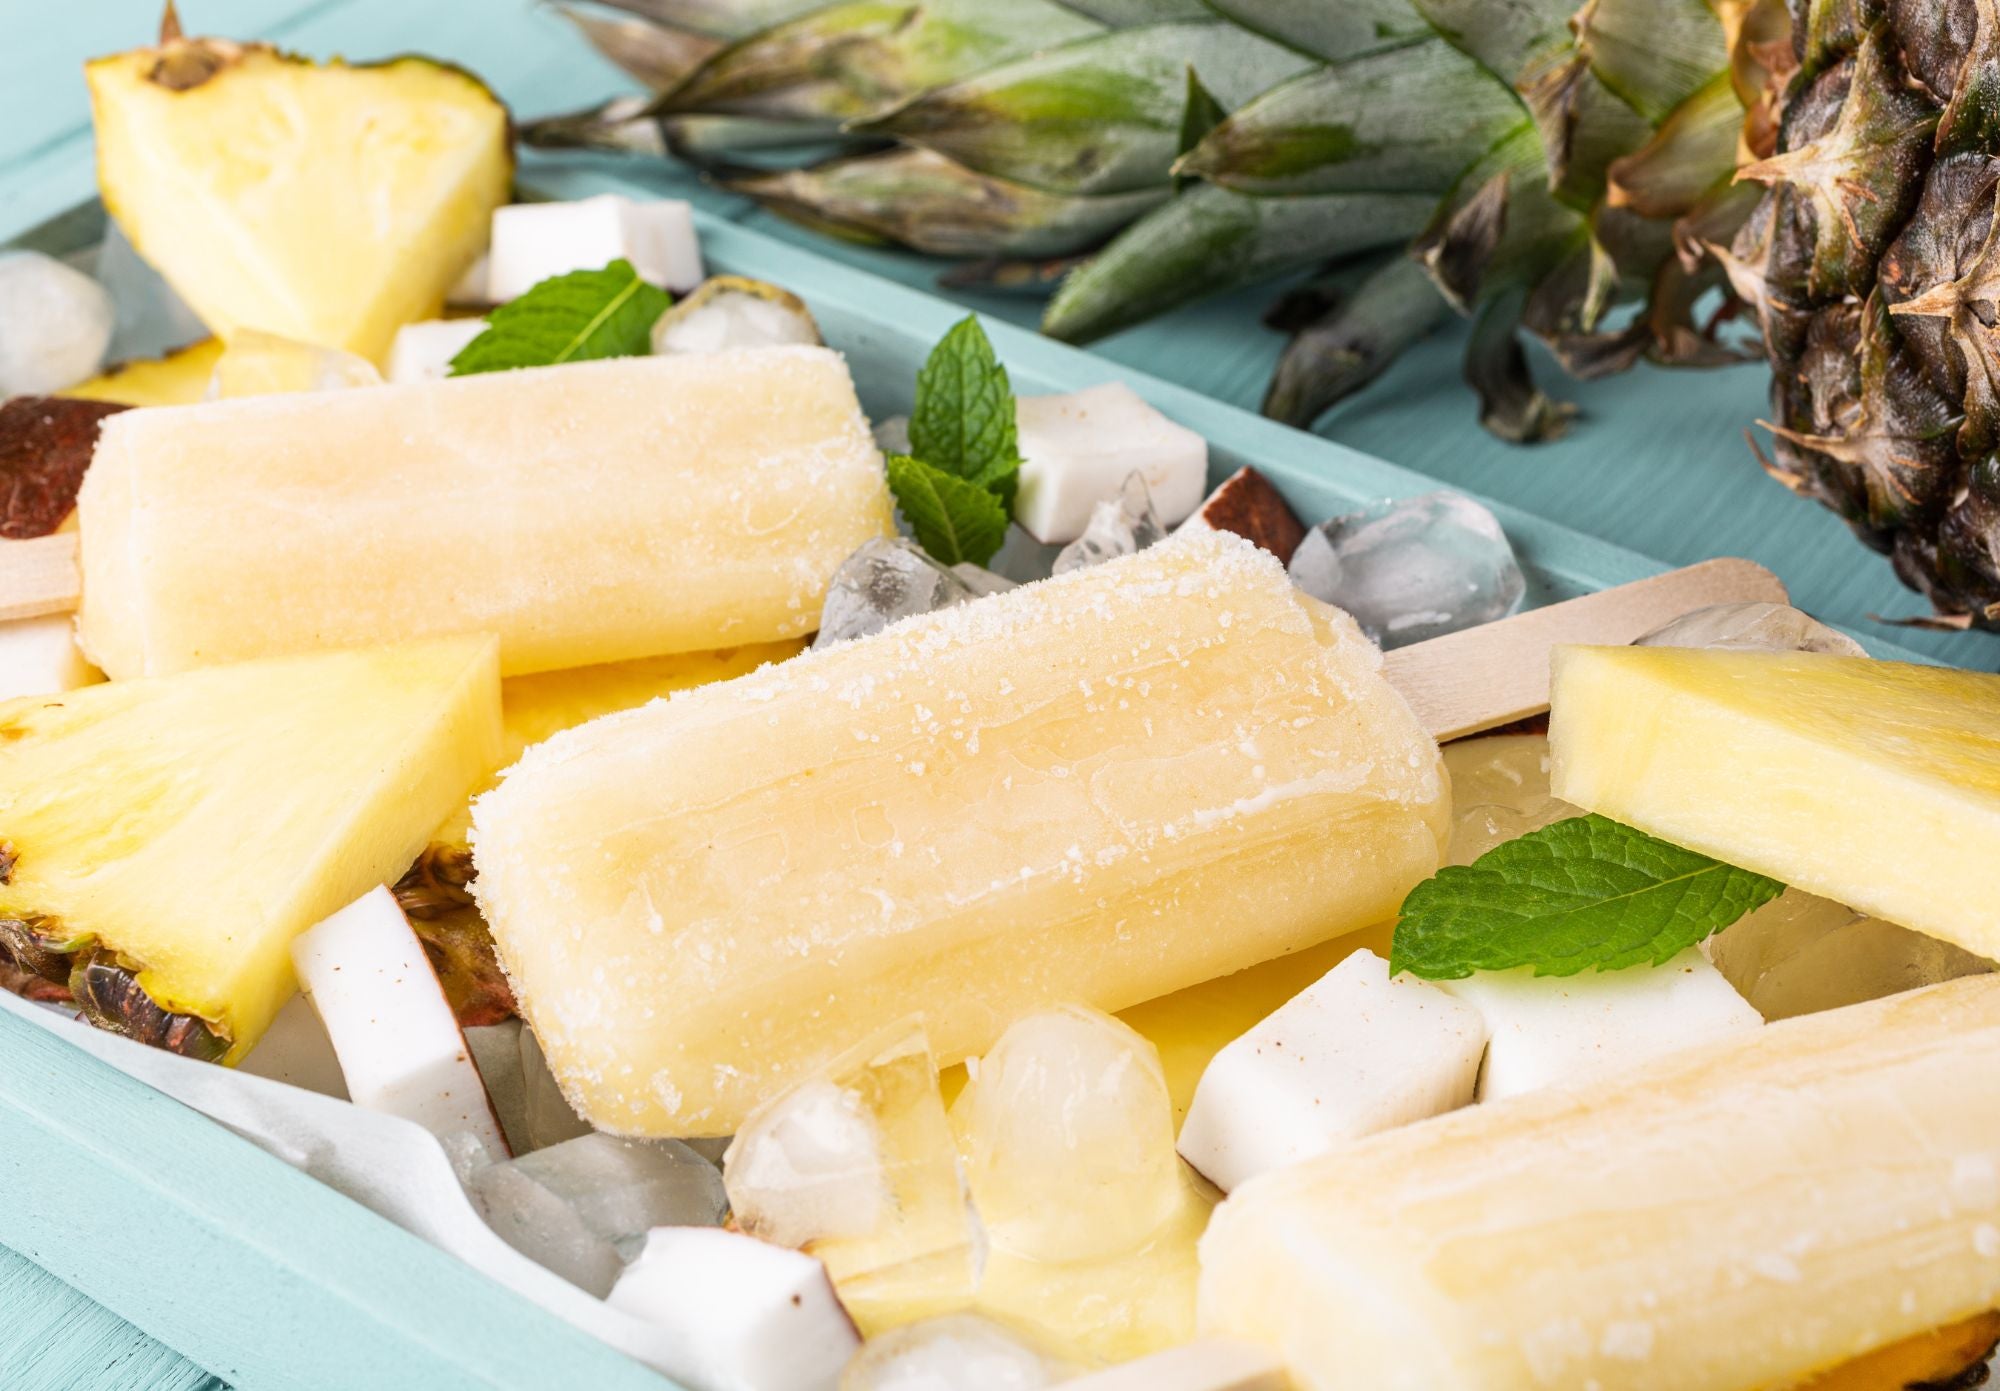 Cool and Refreshing: Discover the Joy of Healthy Freezer Pop Recipes!